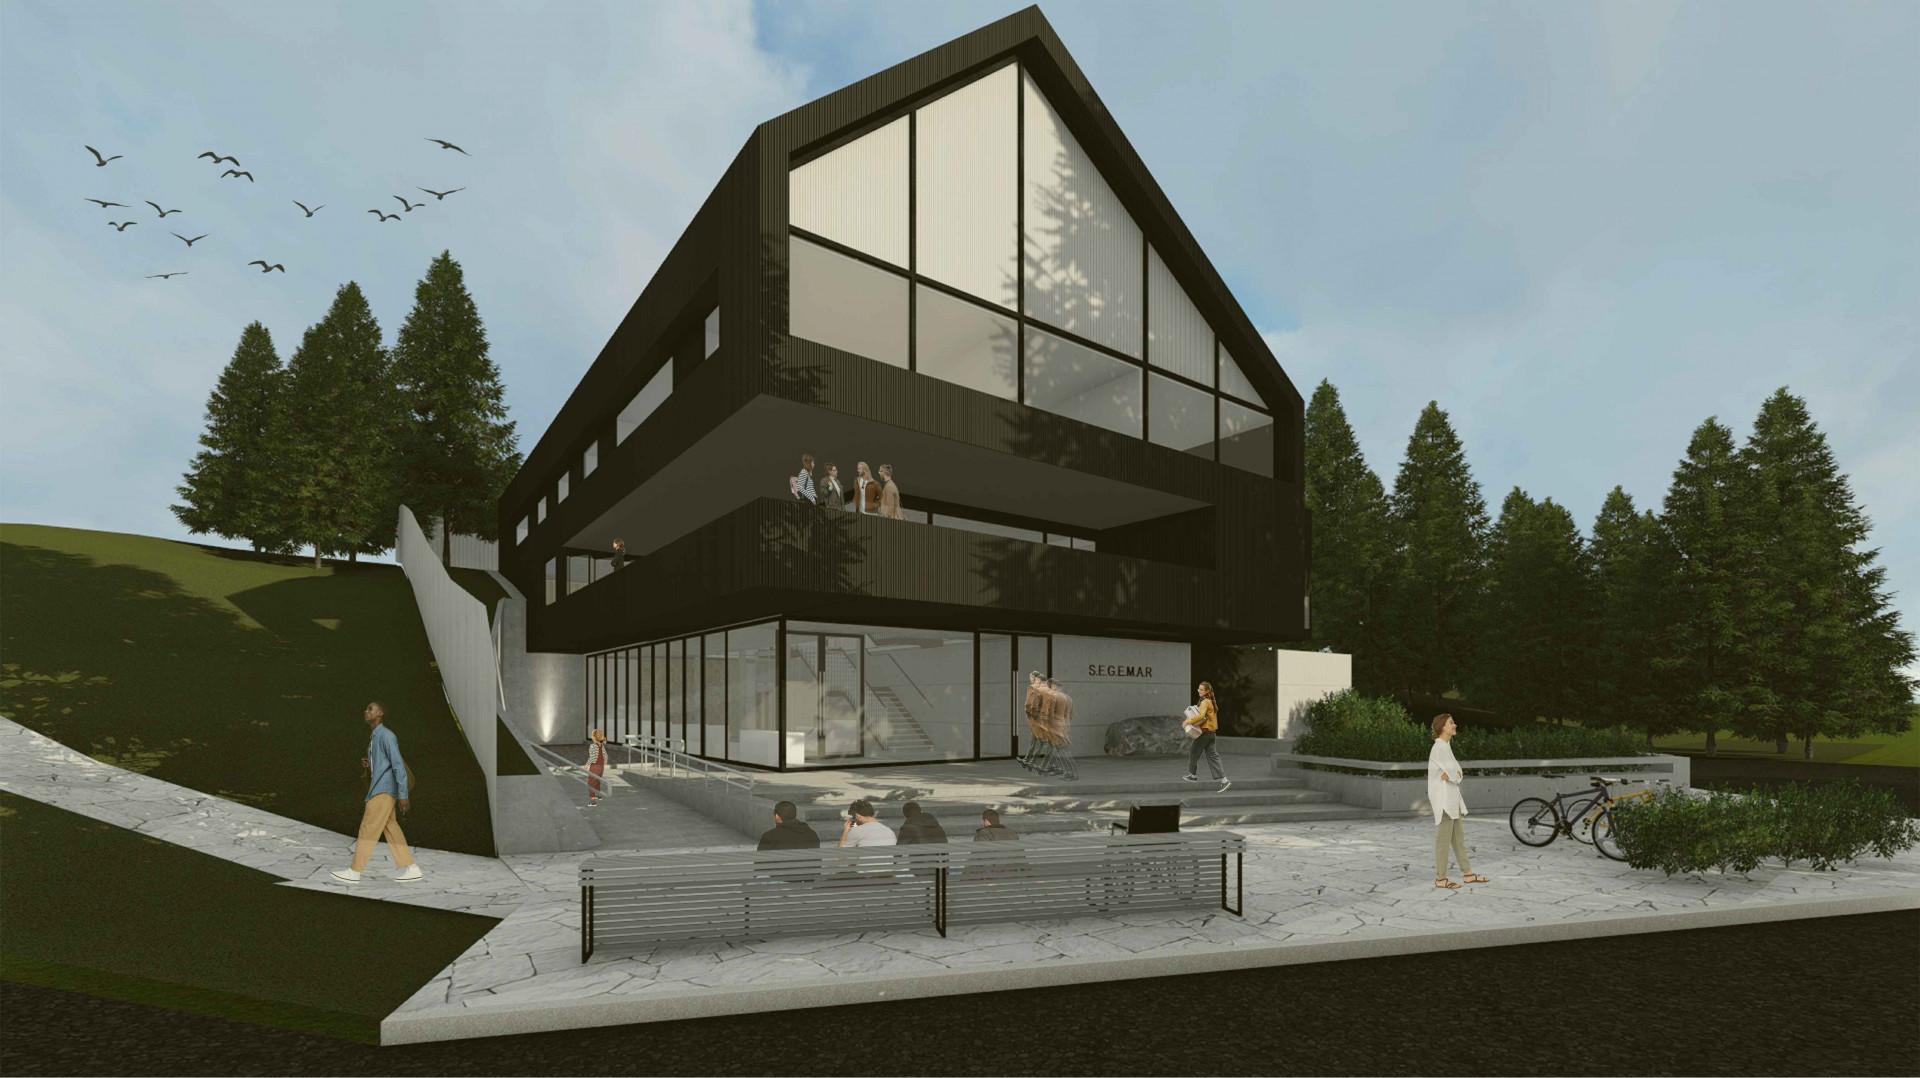 SEGEMAR will construct the new headquarters of the Argentine Observatory of Volcanism (OAVV) in the city of San Carlos de Bariloche through the Federal Program “Building Science” of MINCyT